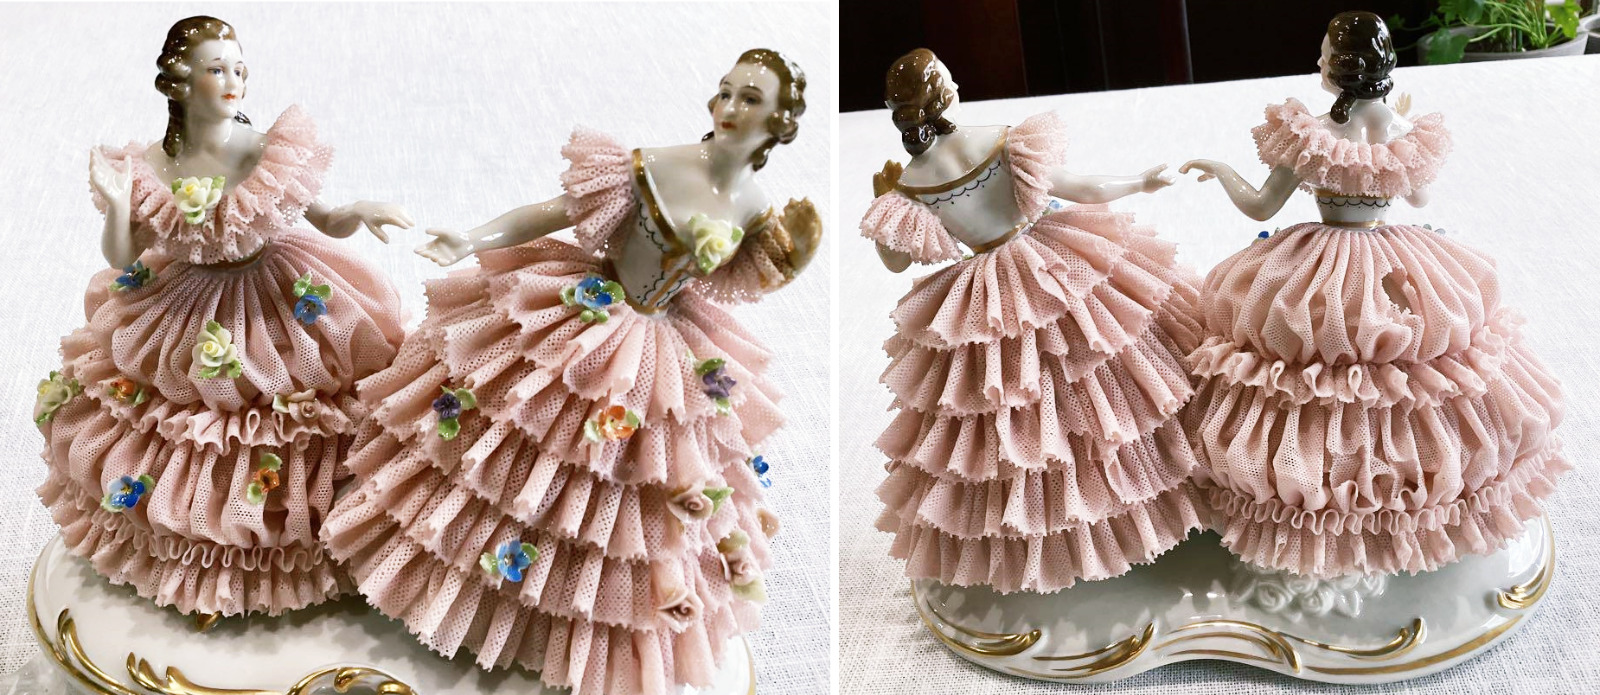 Irish Dresden Porcelain Lace Doll Figurine Set Of 2 Rare No Box made in Germany